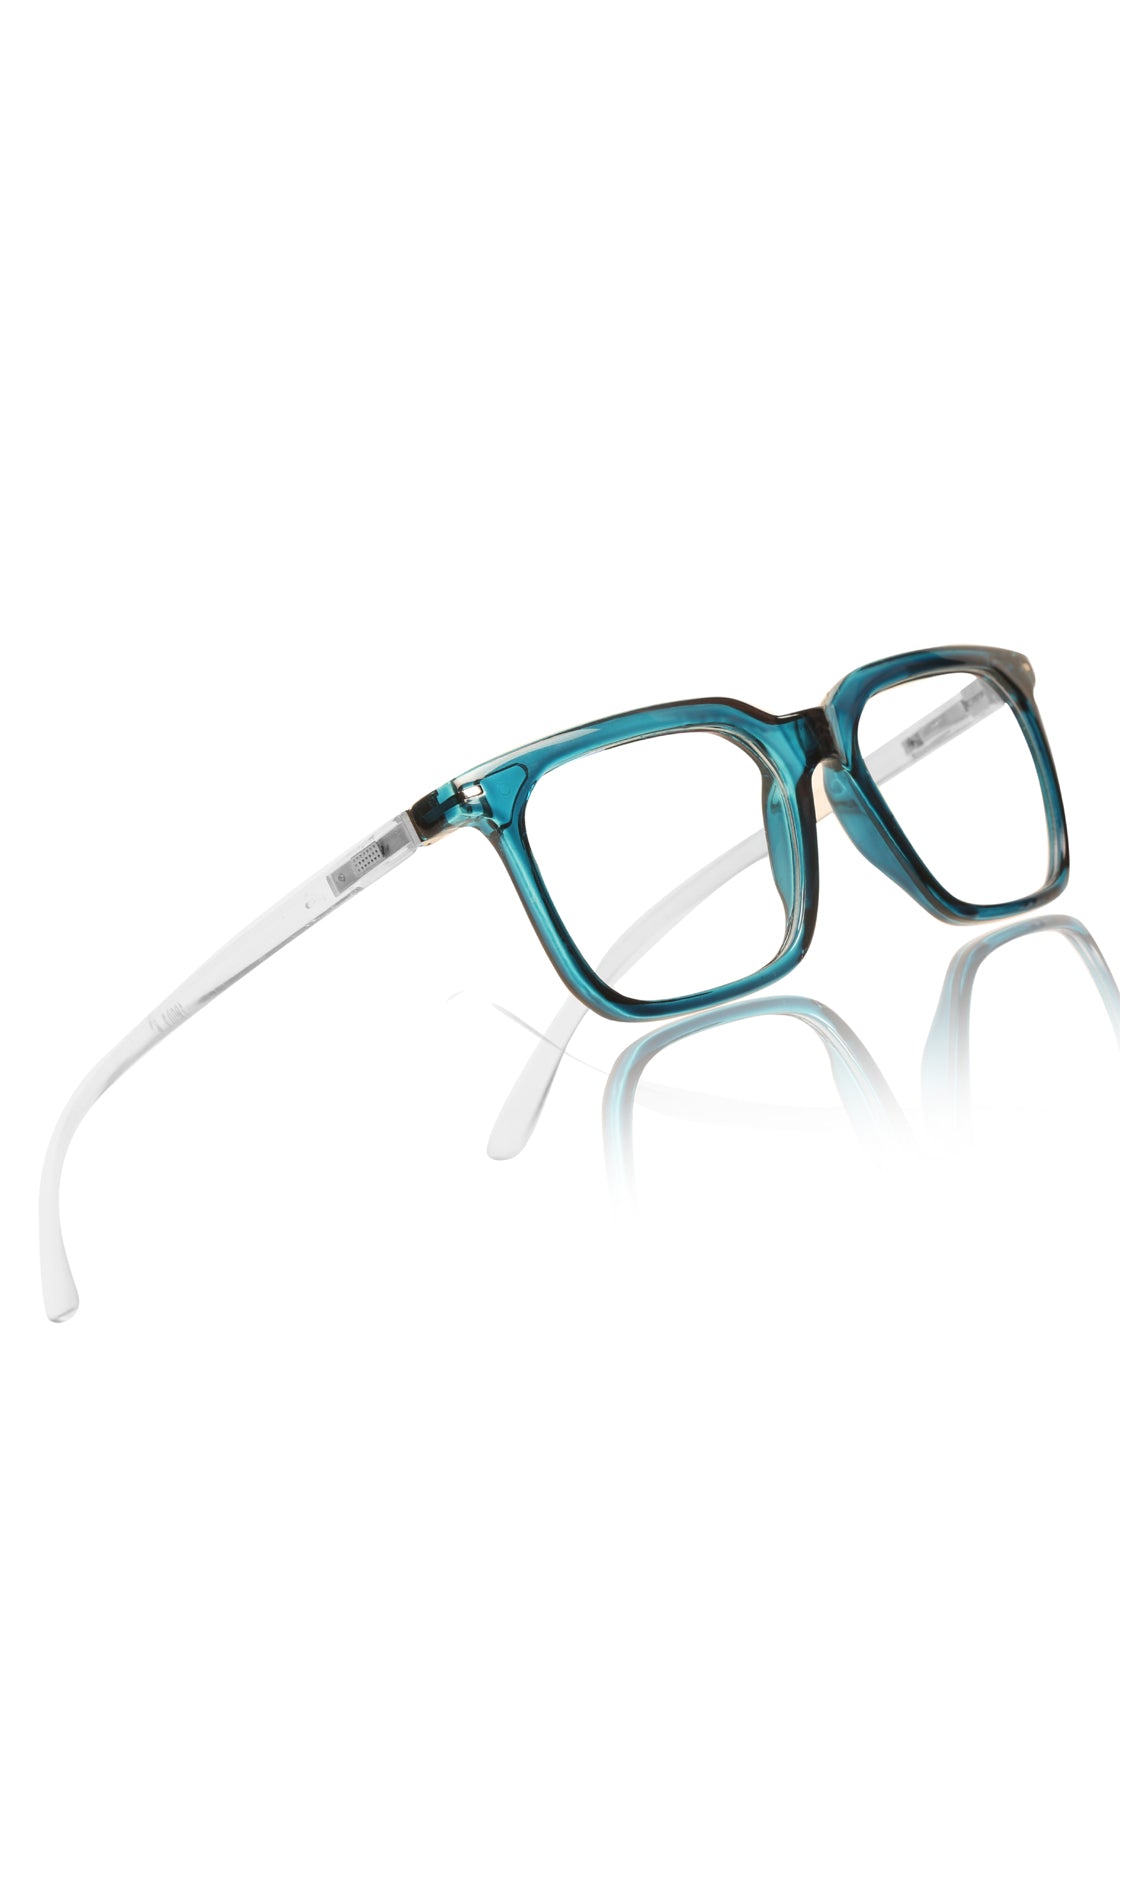 Jodykoes® Colour Frame Series: Stylish Square Spectacle Frames with Blue Ray Protection and Anti-Glare Glasses for Men and Women (Turquoise Blue) - Jodykoes ®